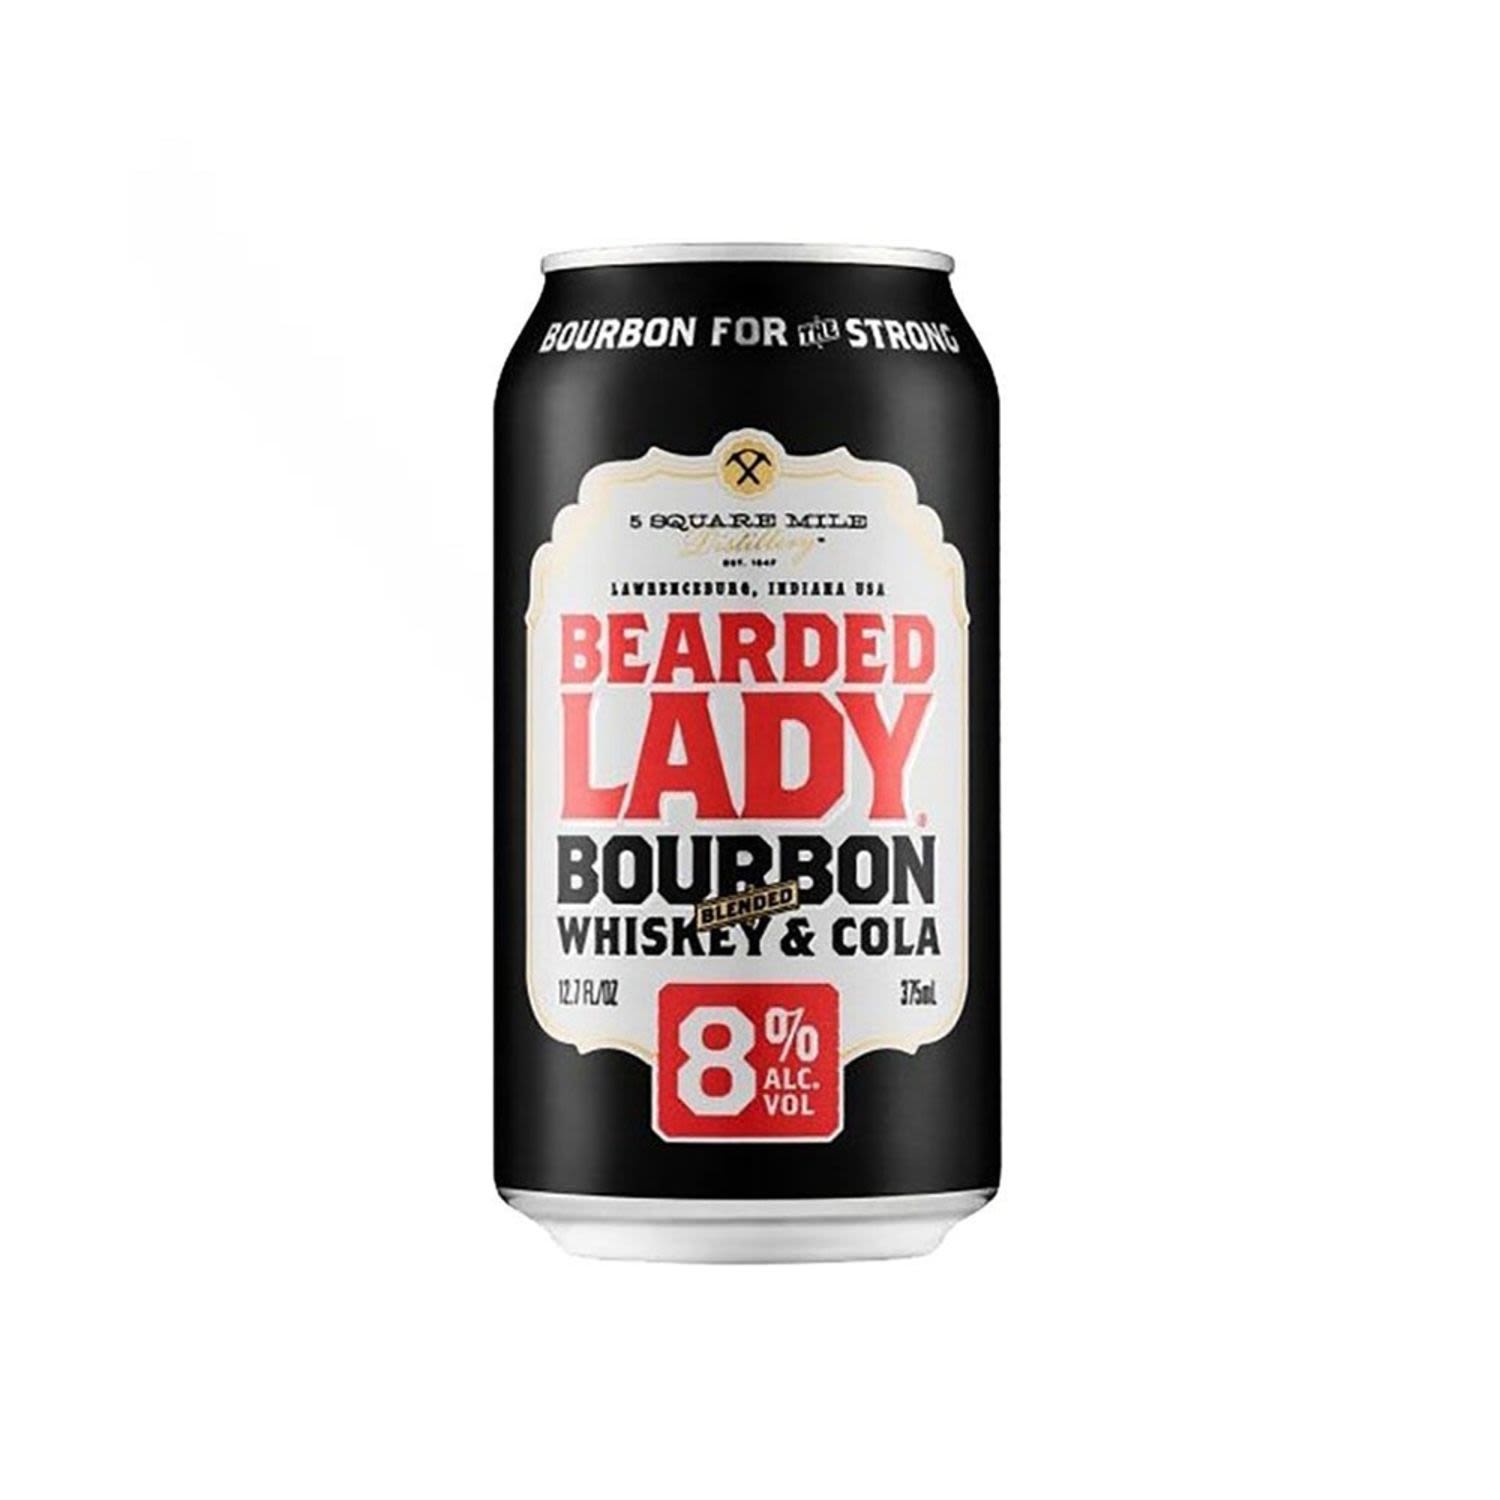 Bearded Lady Bourbon is made with a strength you can taste. It delivers a full bourbon vanilla oak flavour and a cola that doesnt overpower the bourbon sweetness.<br /> <br />Alcohol Volume: 8.00%<br /><br />Pack Format: Can<br /><br />Standard Drinks: 2.4</br /><br />Pack Type: Can<br />